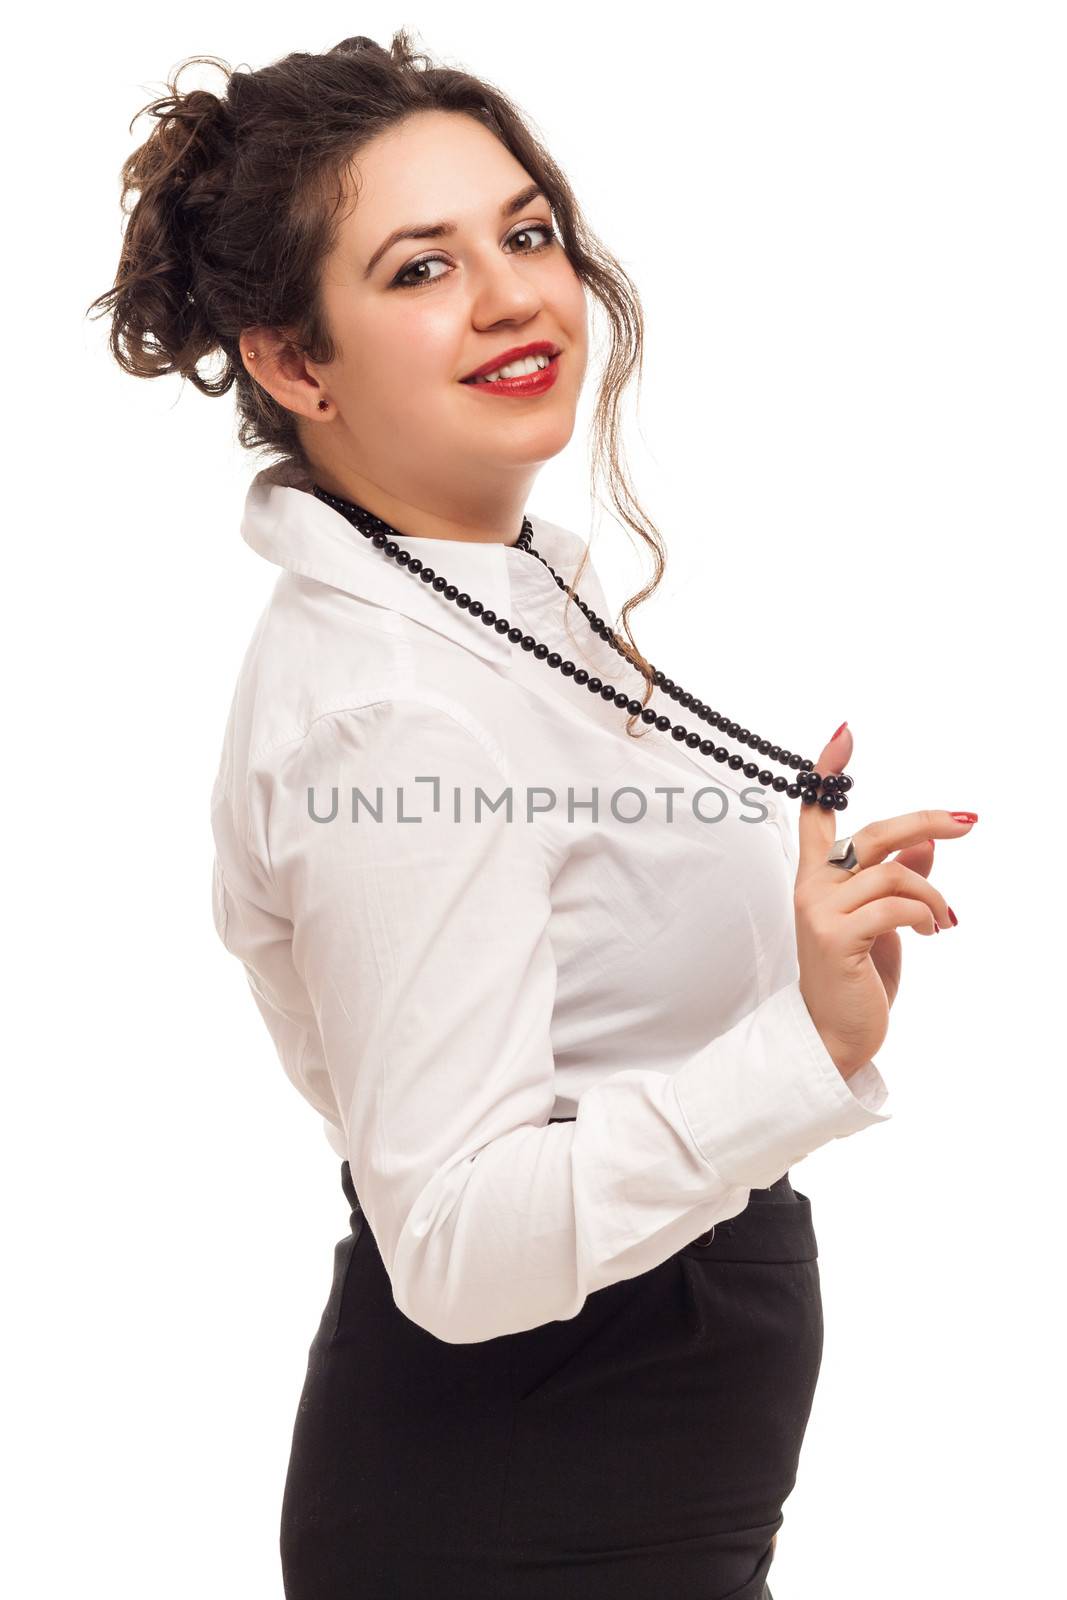 confident woman playing with necklace on white background